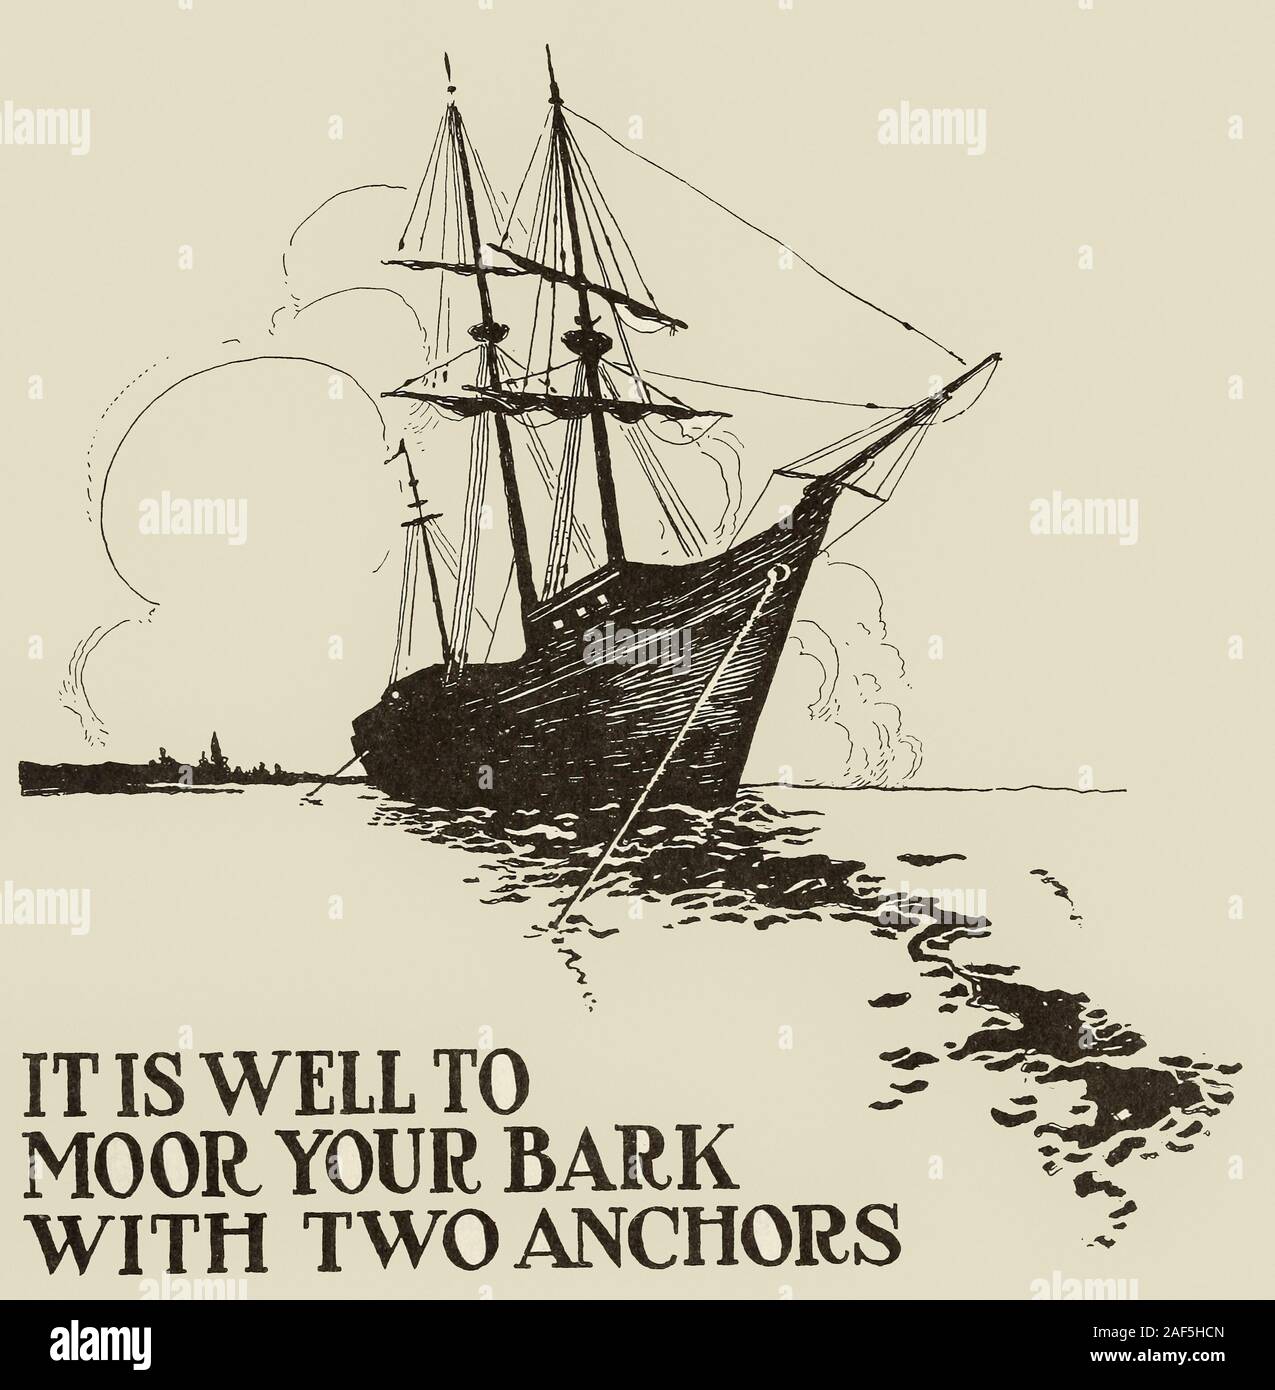 It is well to moor your bark with two anchors Stock Photo